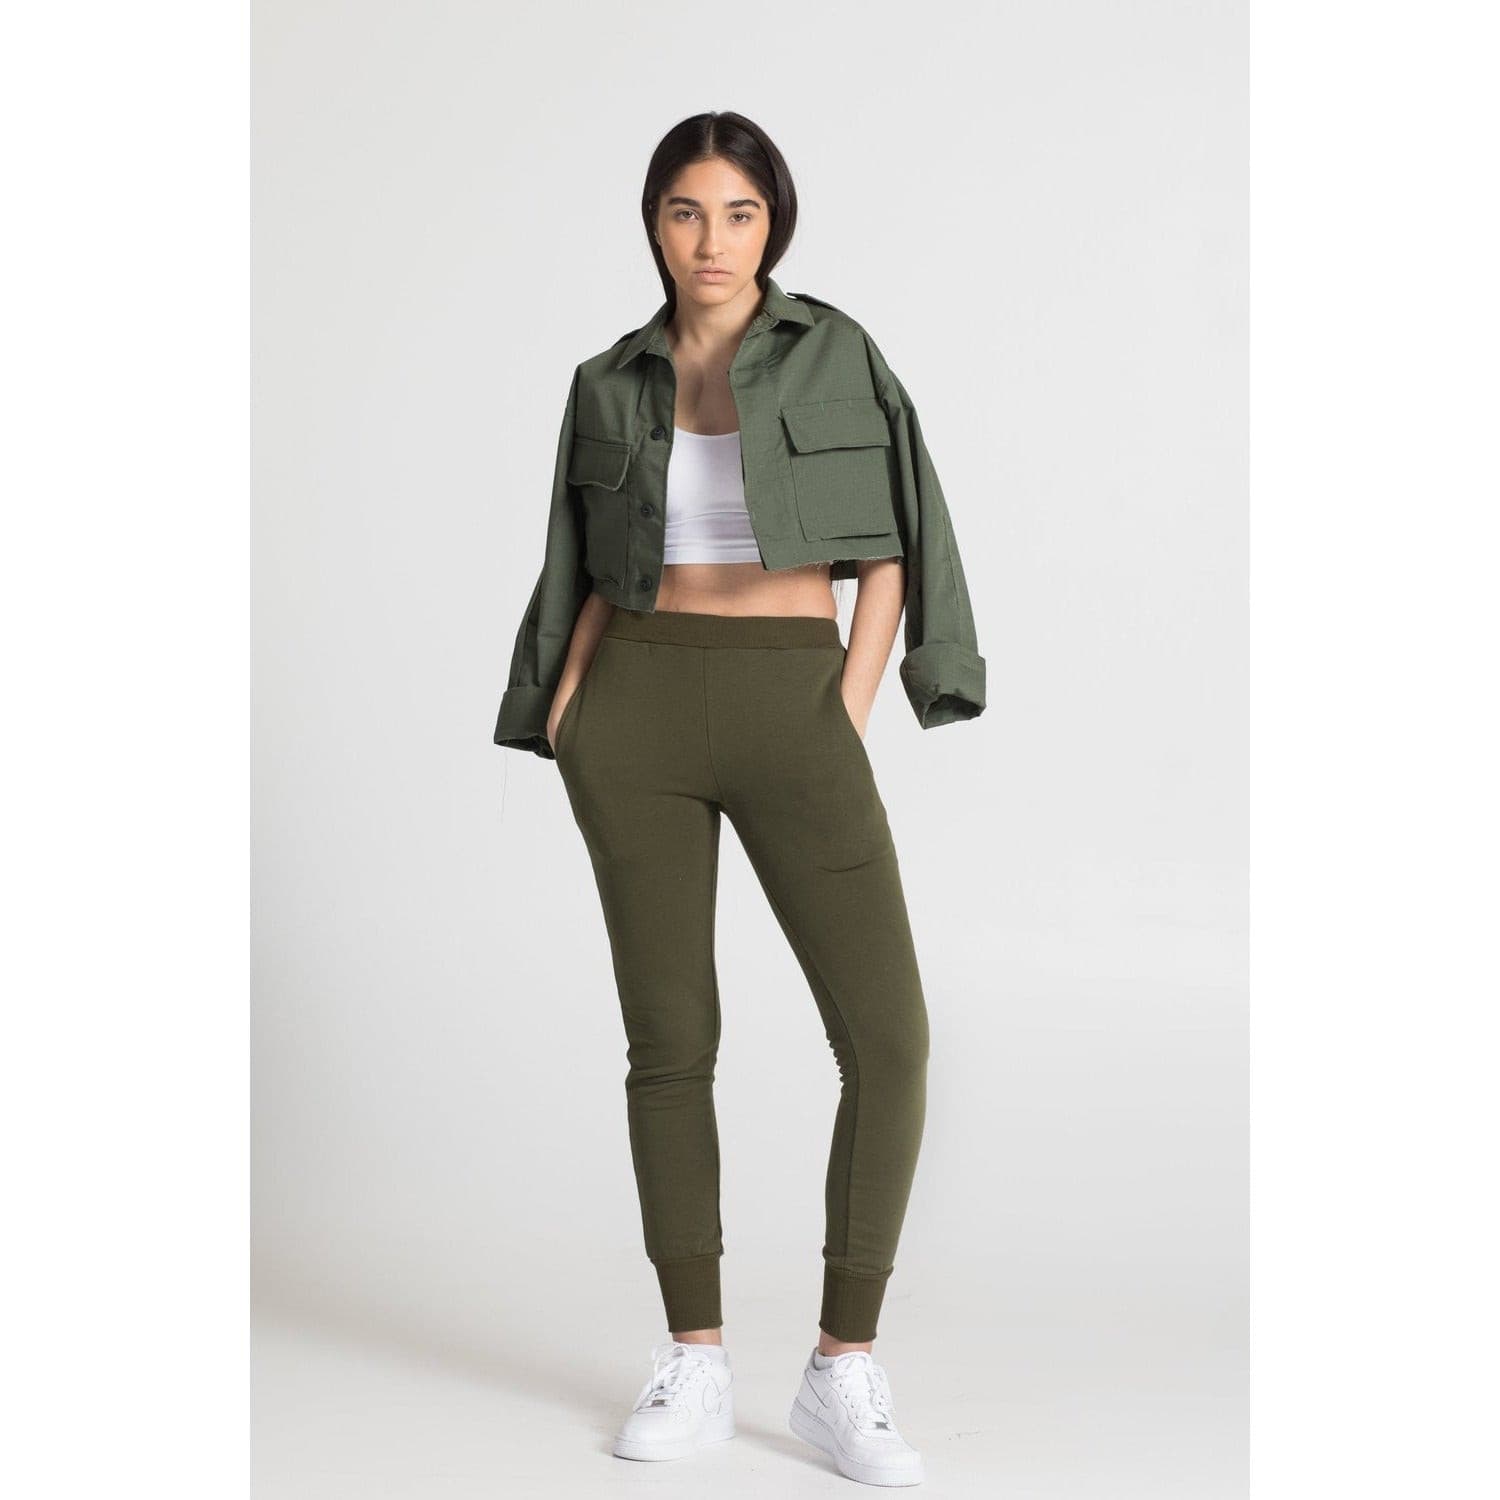 Olive green joggers for women with pockets